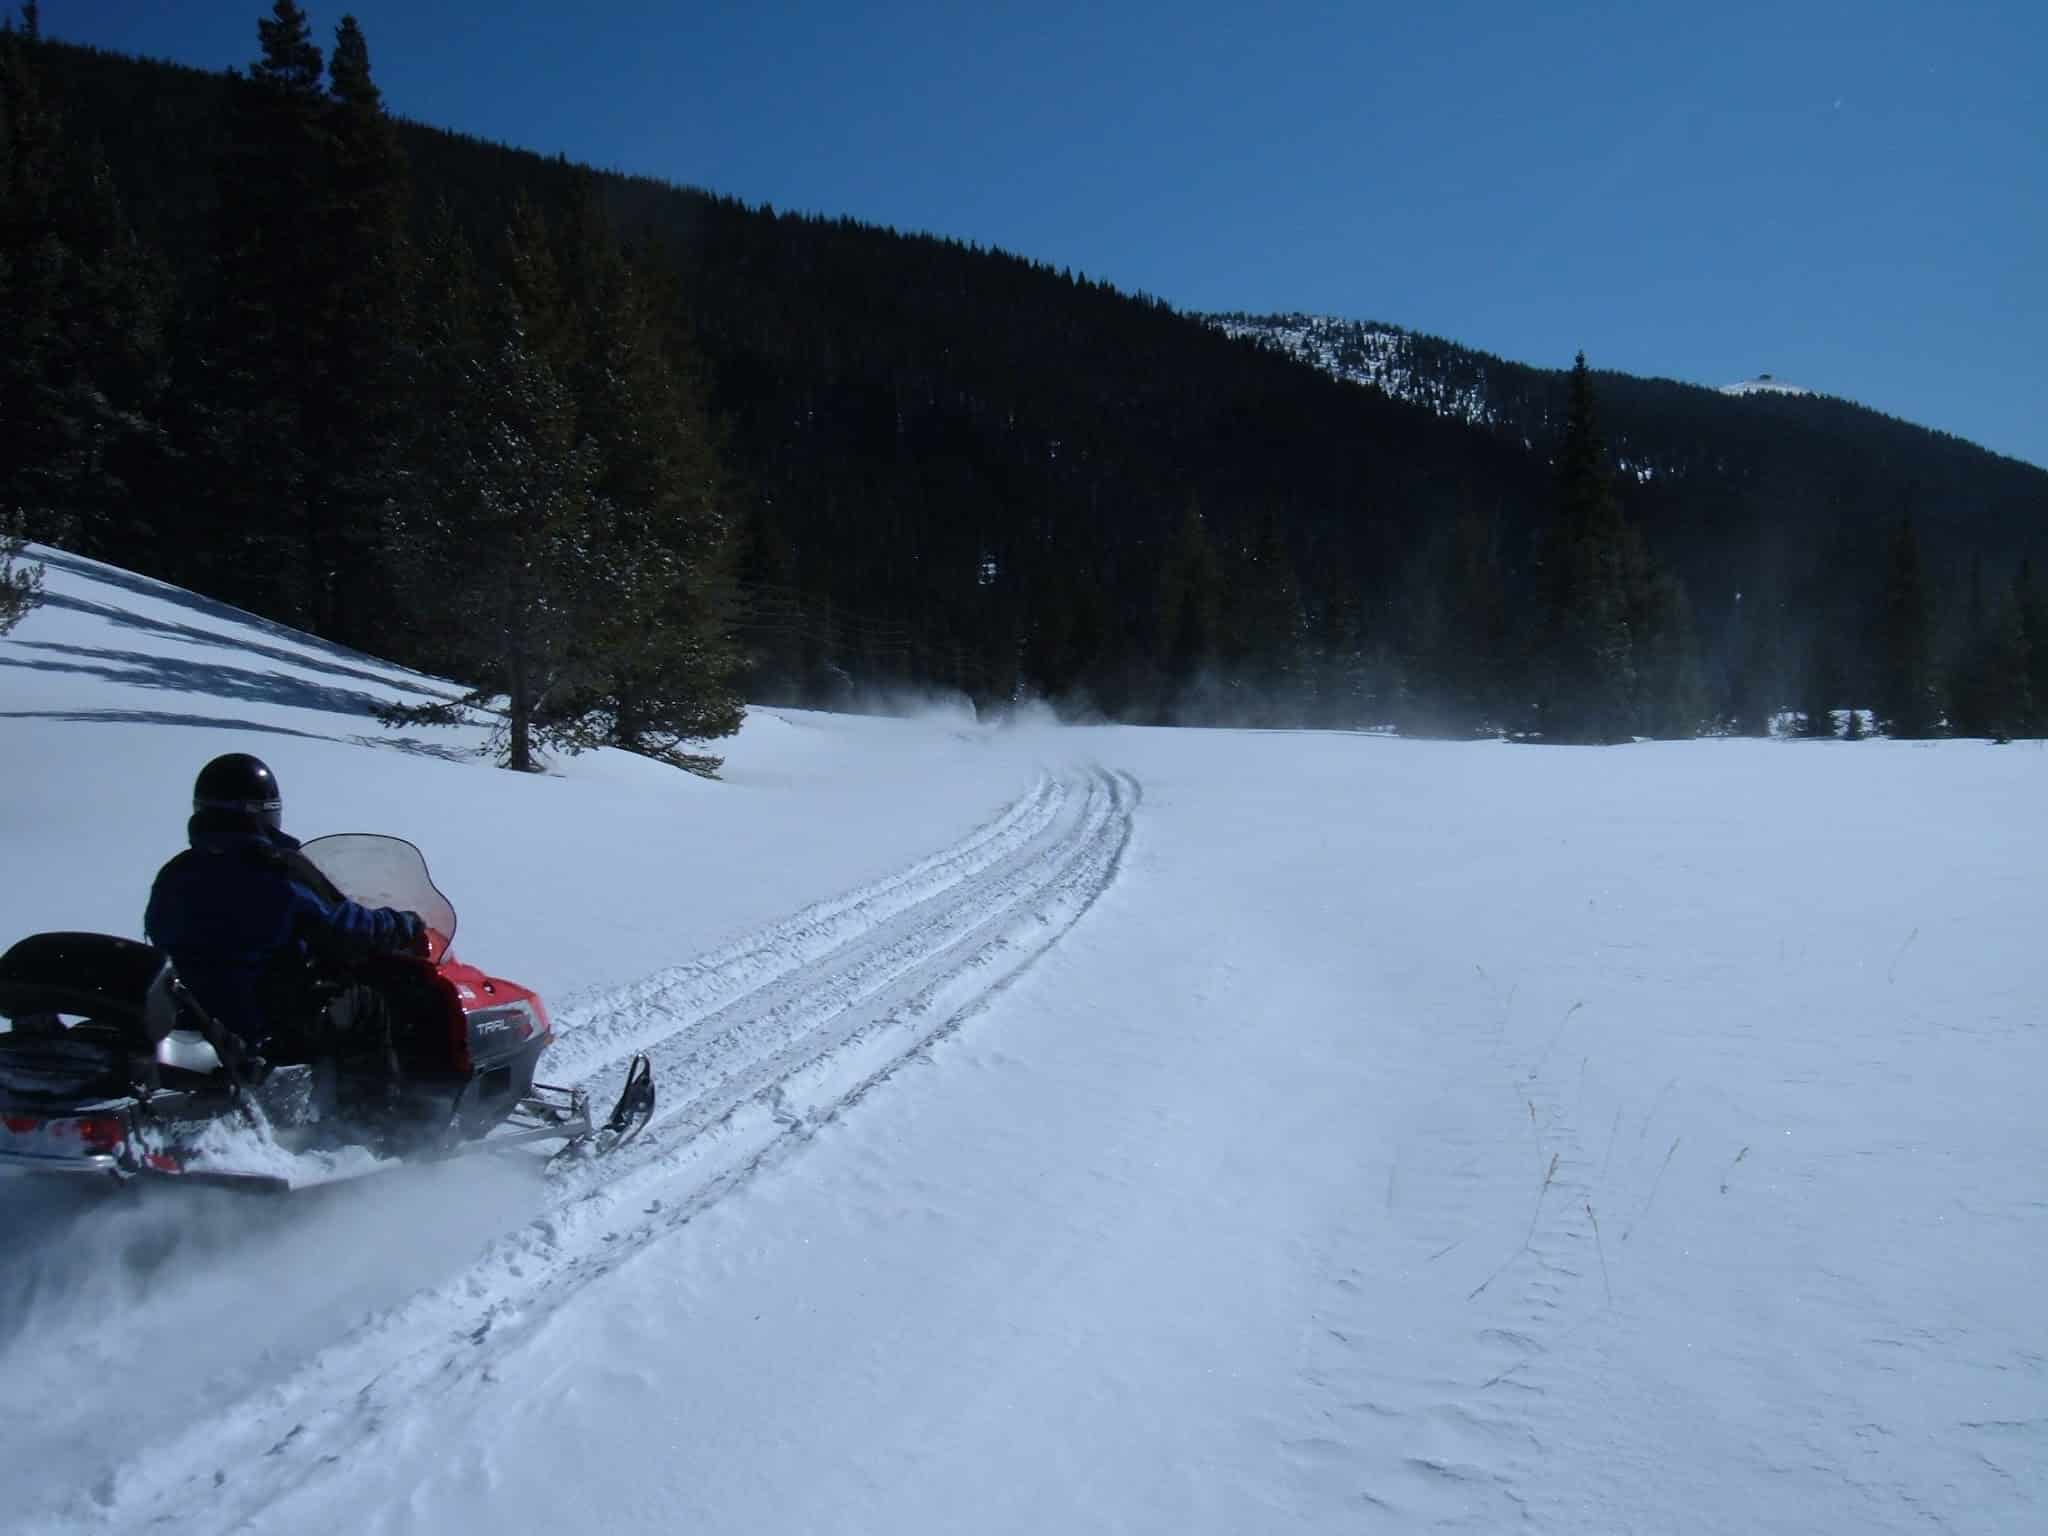 Snowmobiling on an open road in the mountains.